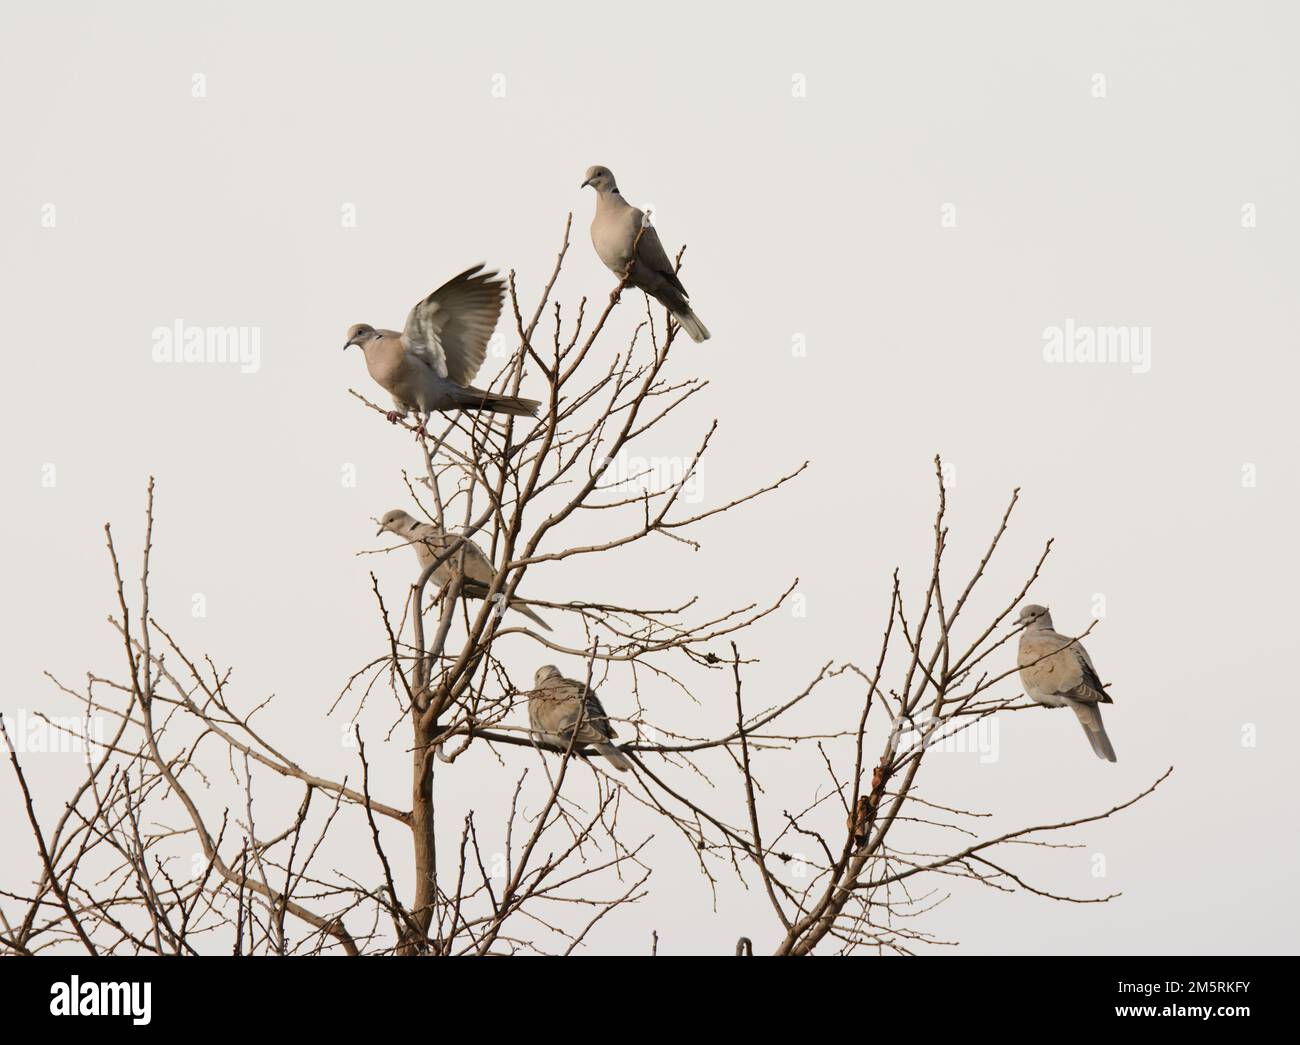 Five Eurasian Collared Doves up in a leafless tree in late fall, with cloudy sky background Stock Photo